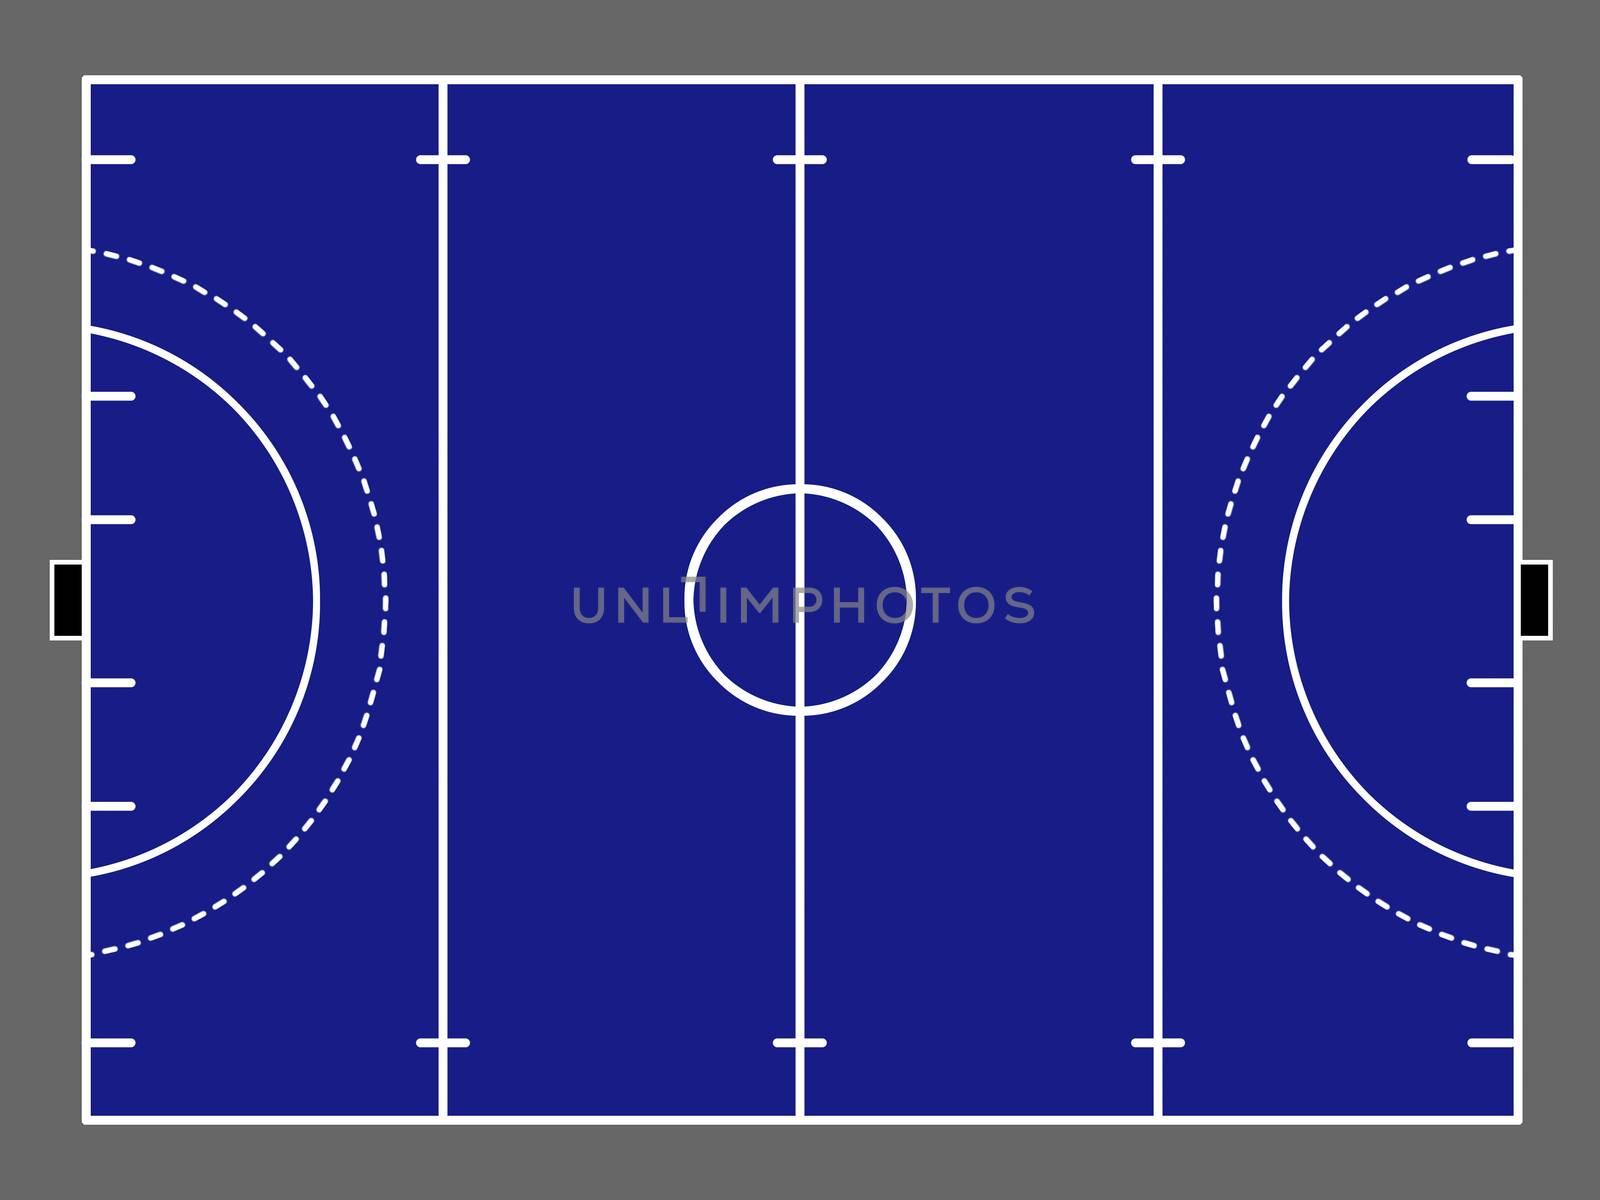 the image model of the Hockey field